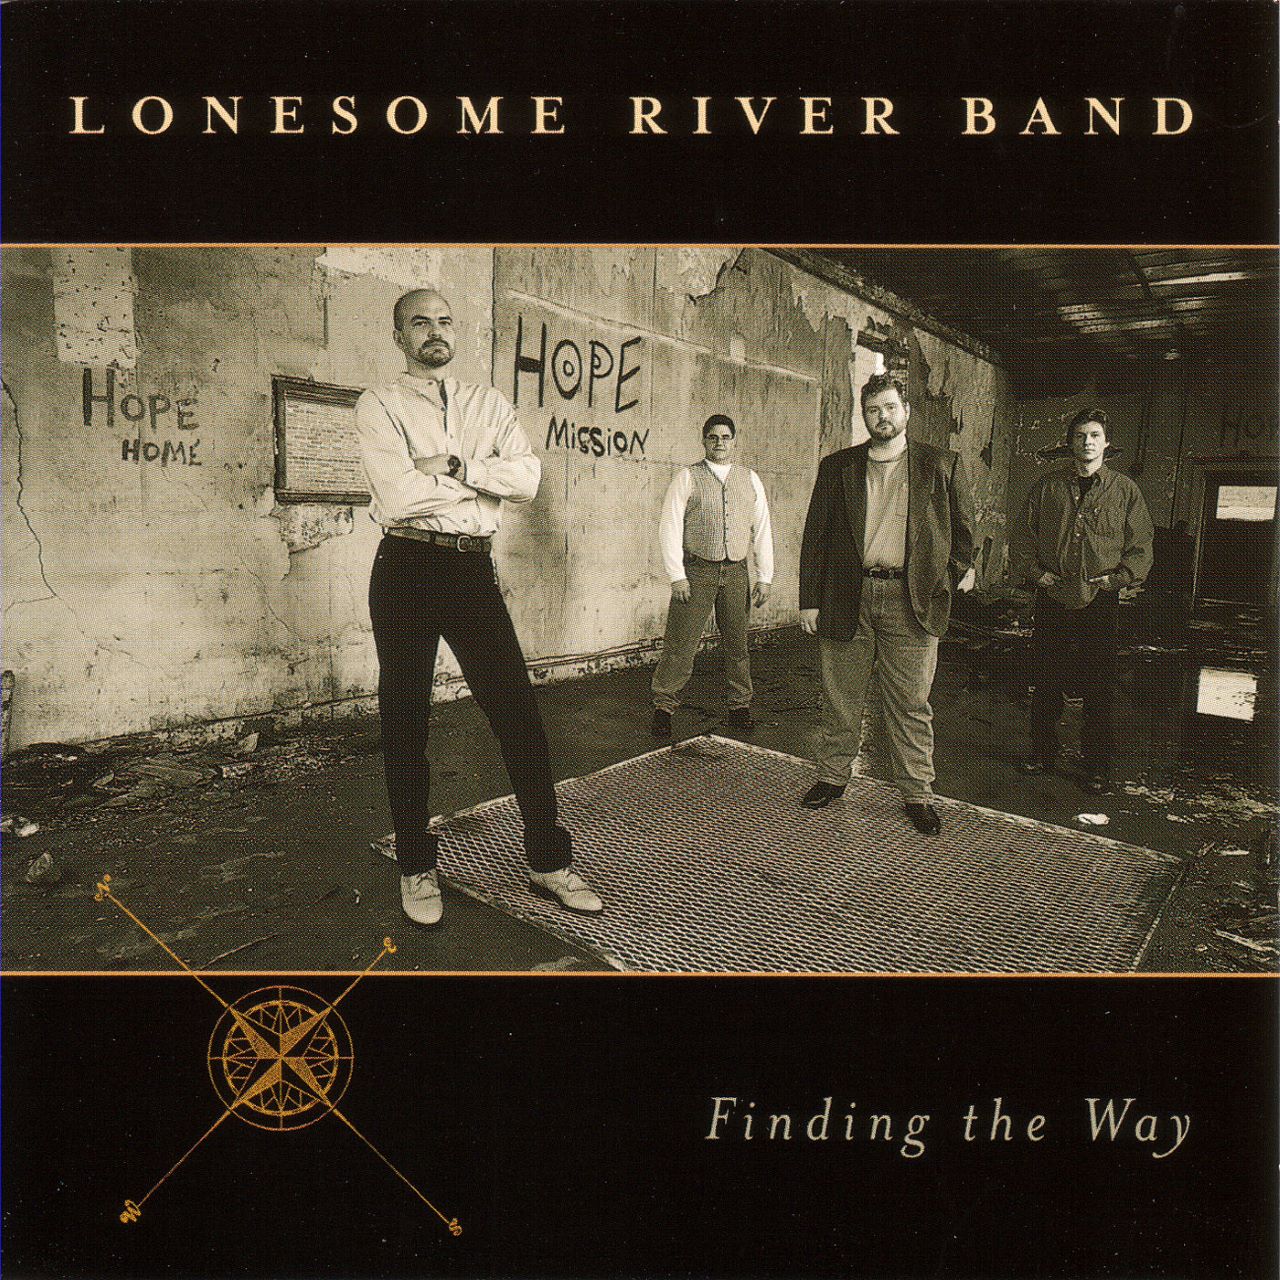 Lonesome River Band - Finding The Way cover album